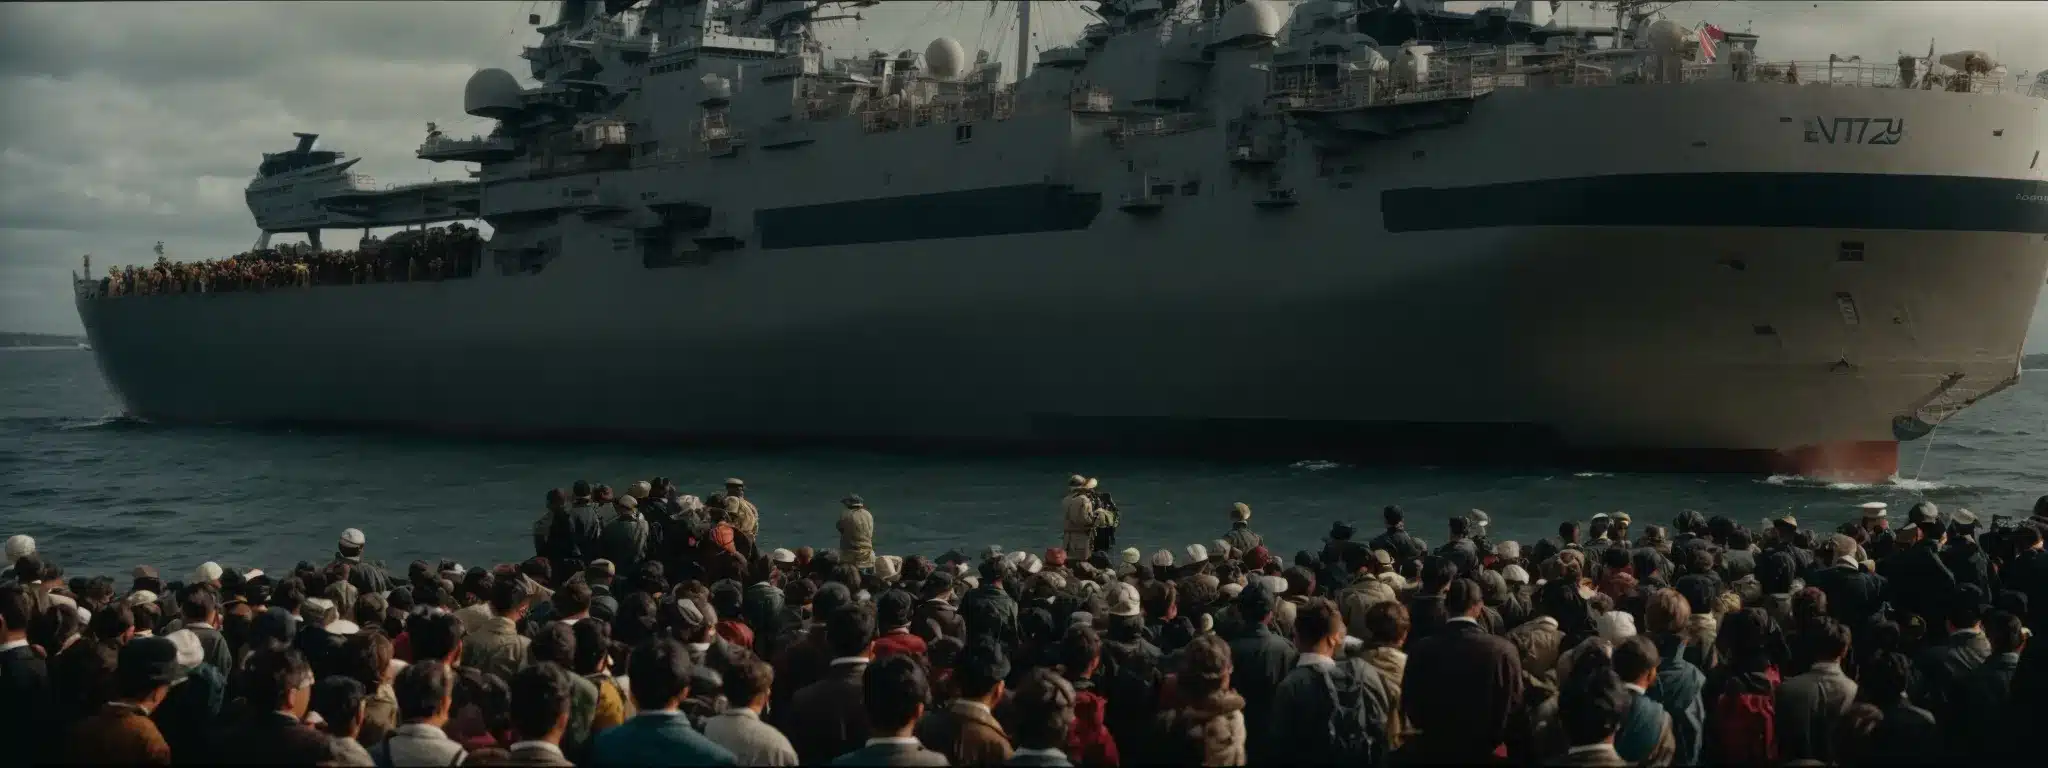 A Ship Embarking On Its Maiden Voyage With A Crowd Gathered To Witness The Launch.